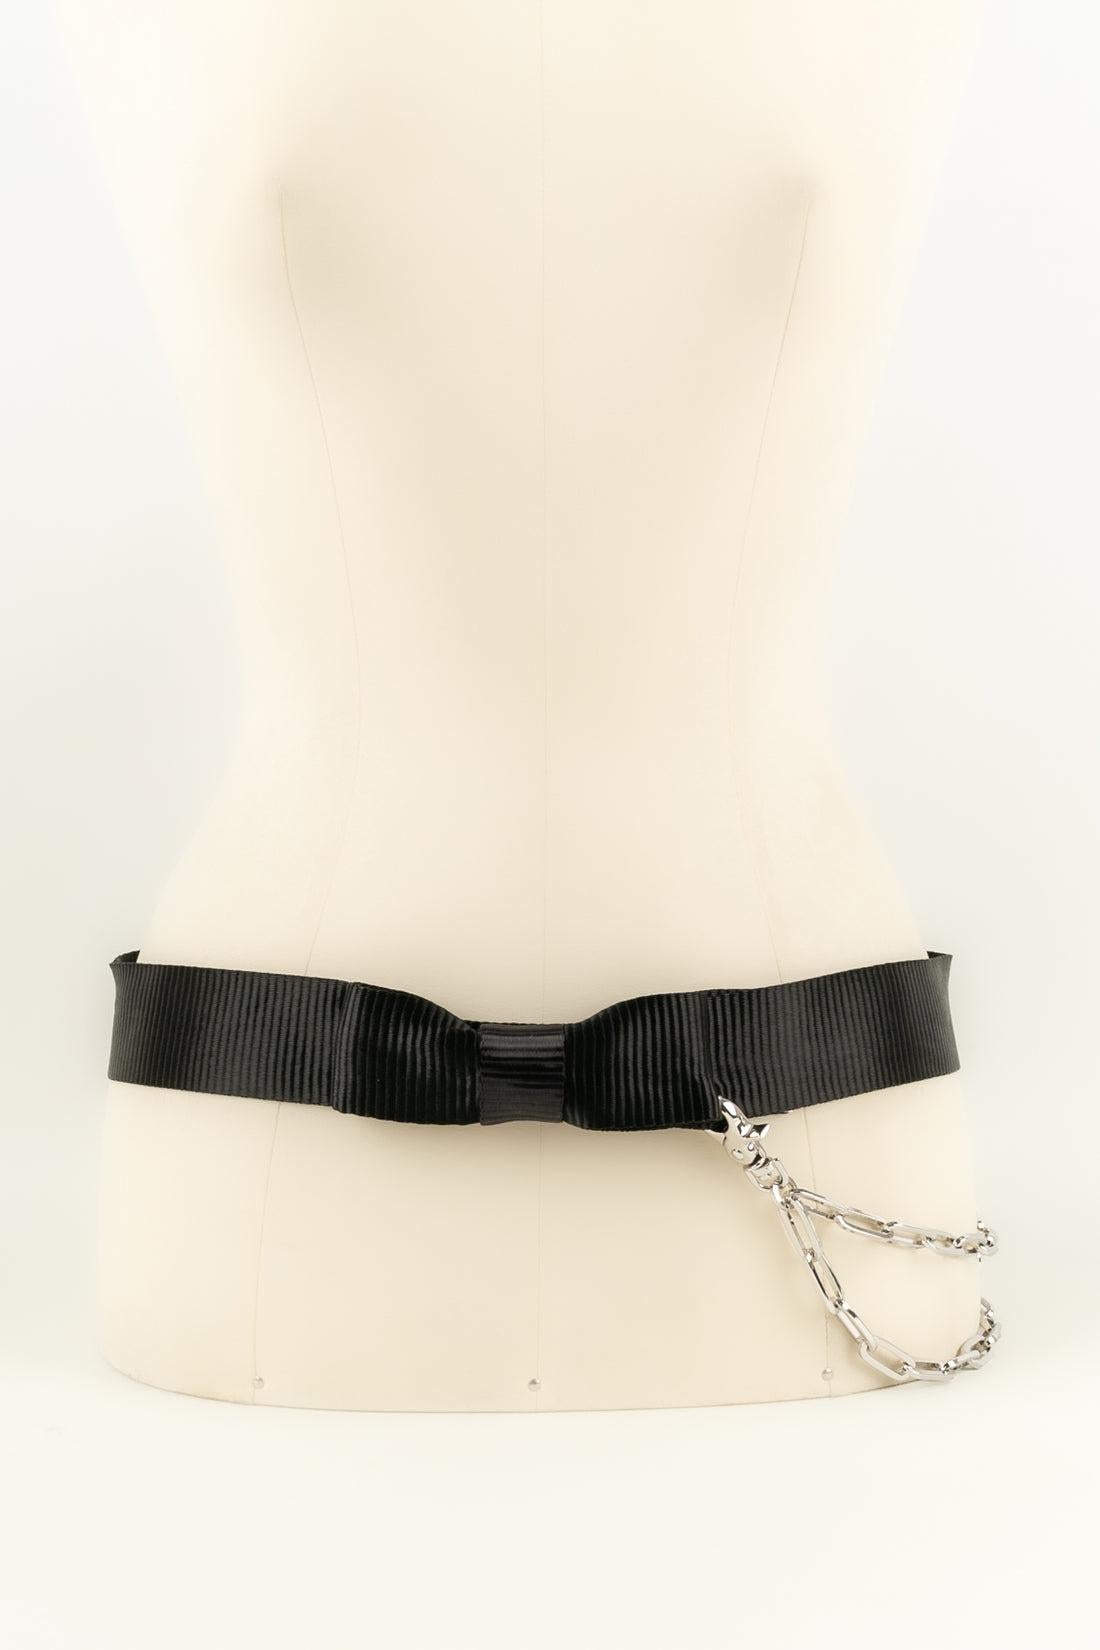 Women's Chanel Belt Spring Composed of Chains in Silver-Plated Metal , 2008